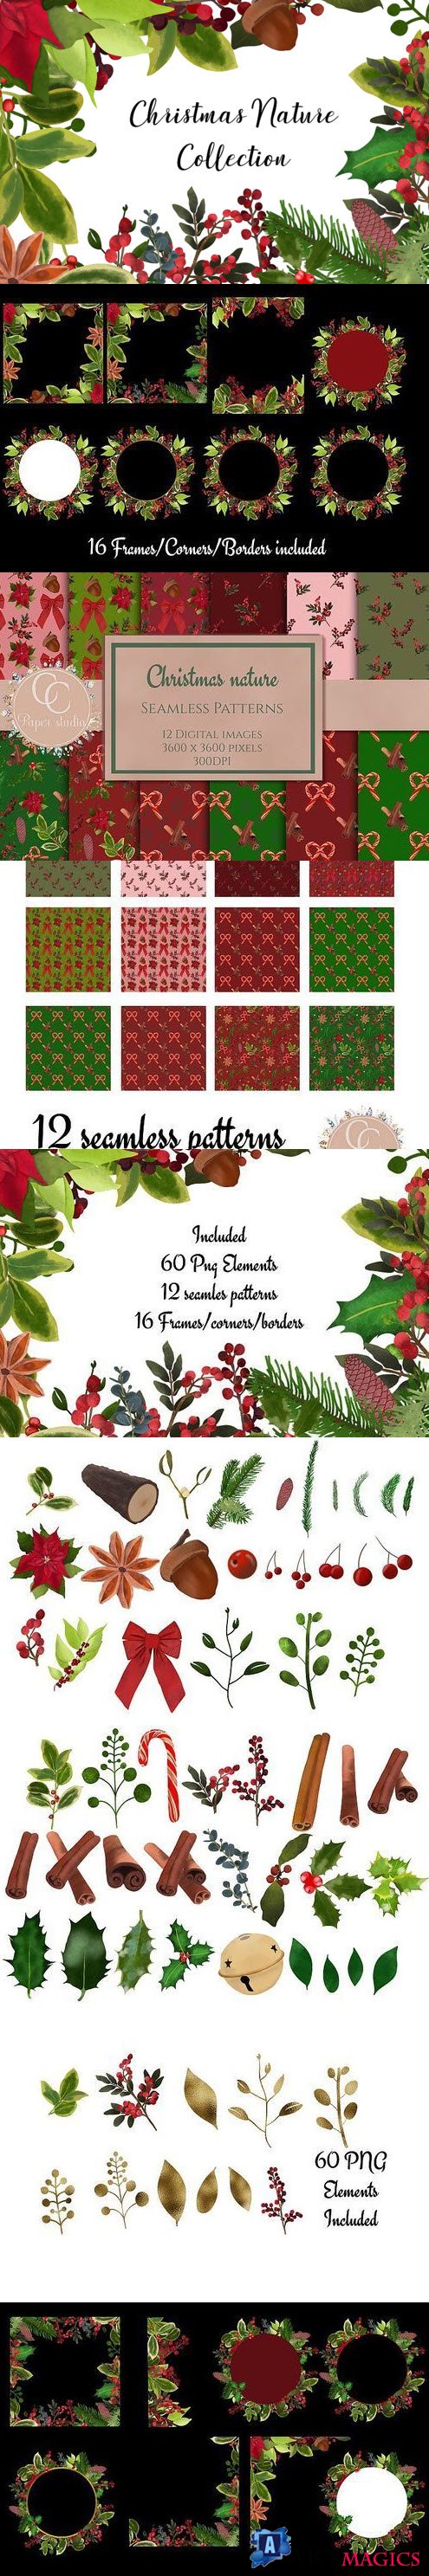 Christmas Nature collection - Watercolor florals - 386740